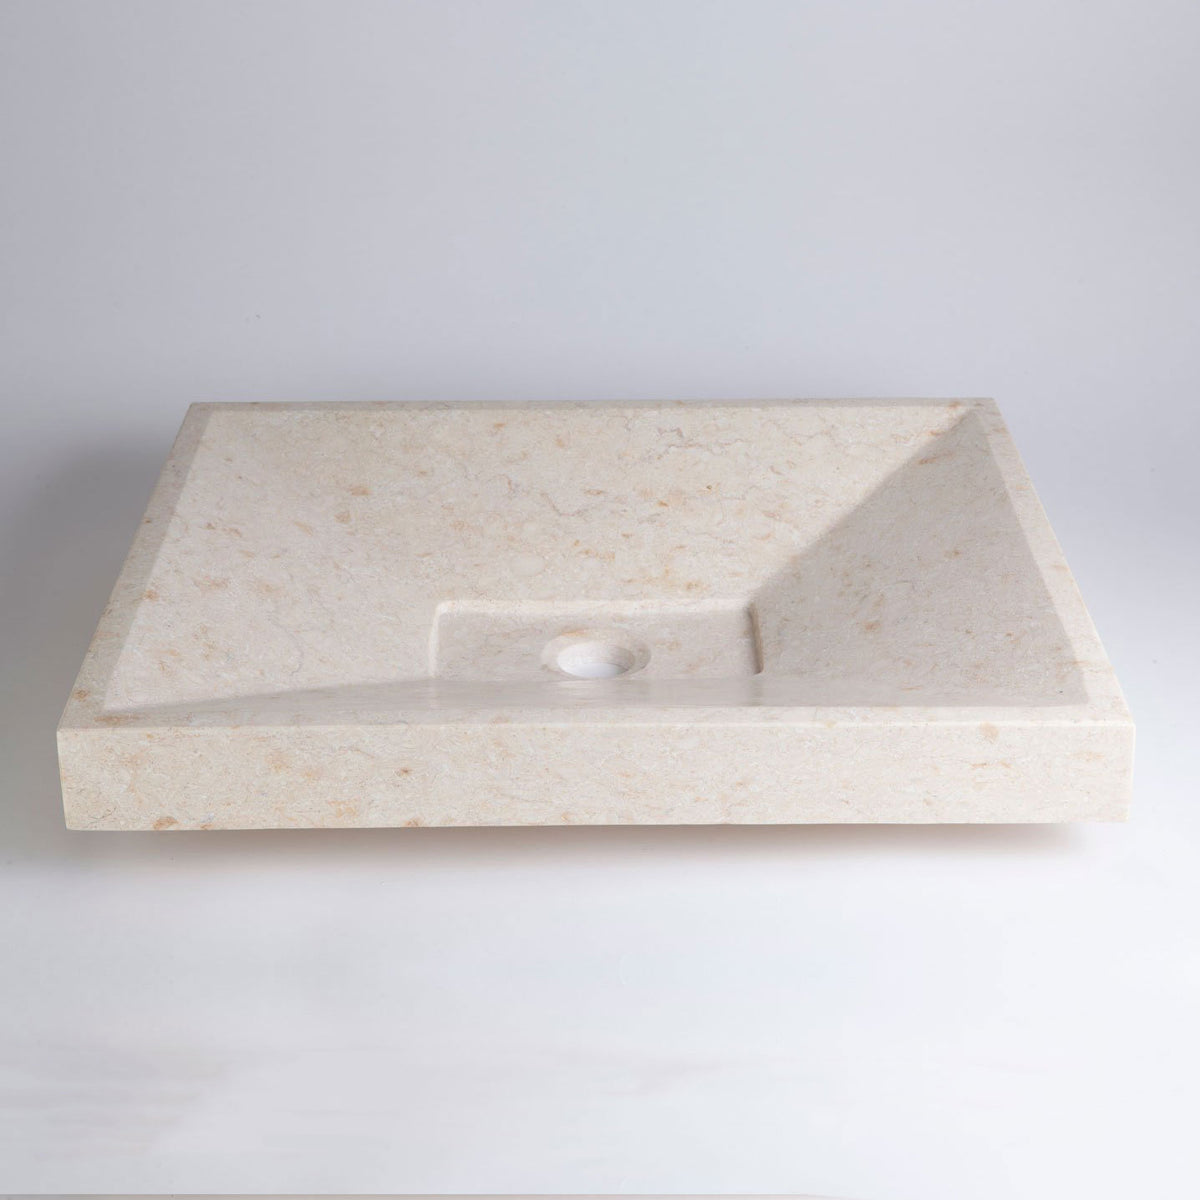 SYNC Drop-In Vessel Sink, Crema Marfil Marble image 2 of 4